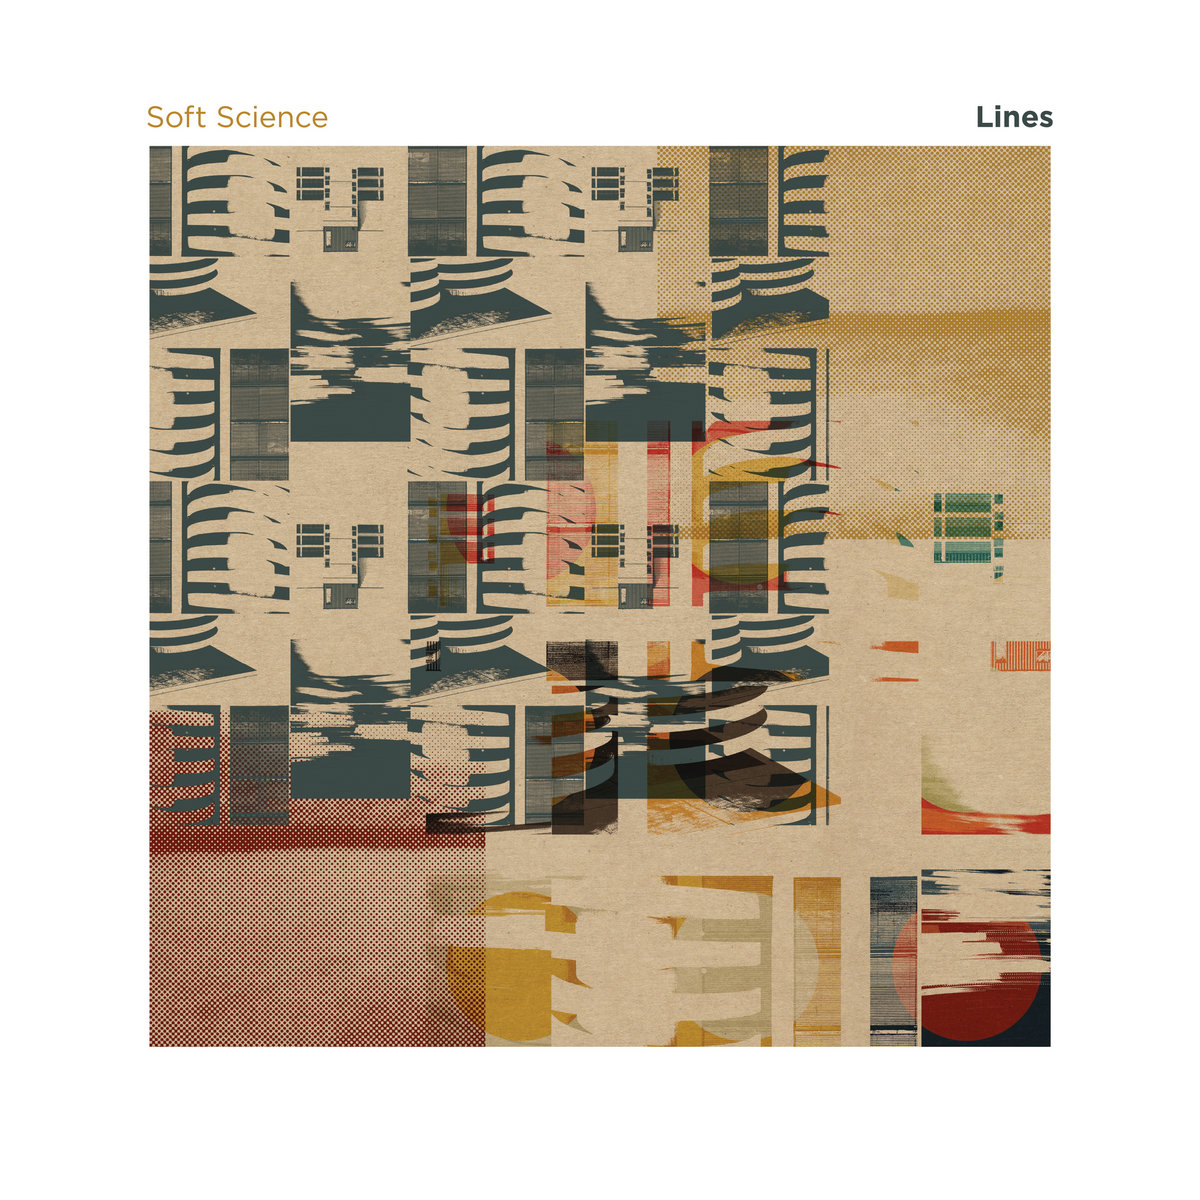 Steadily Blown Away – “Lines” from Northern California’s Soft Science